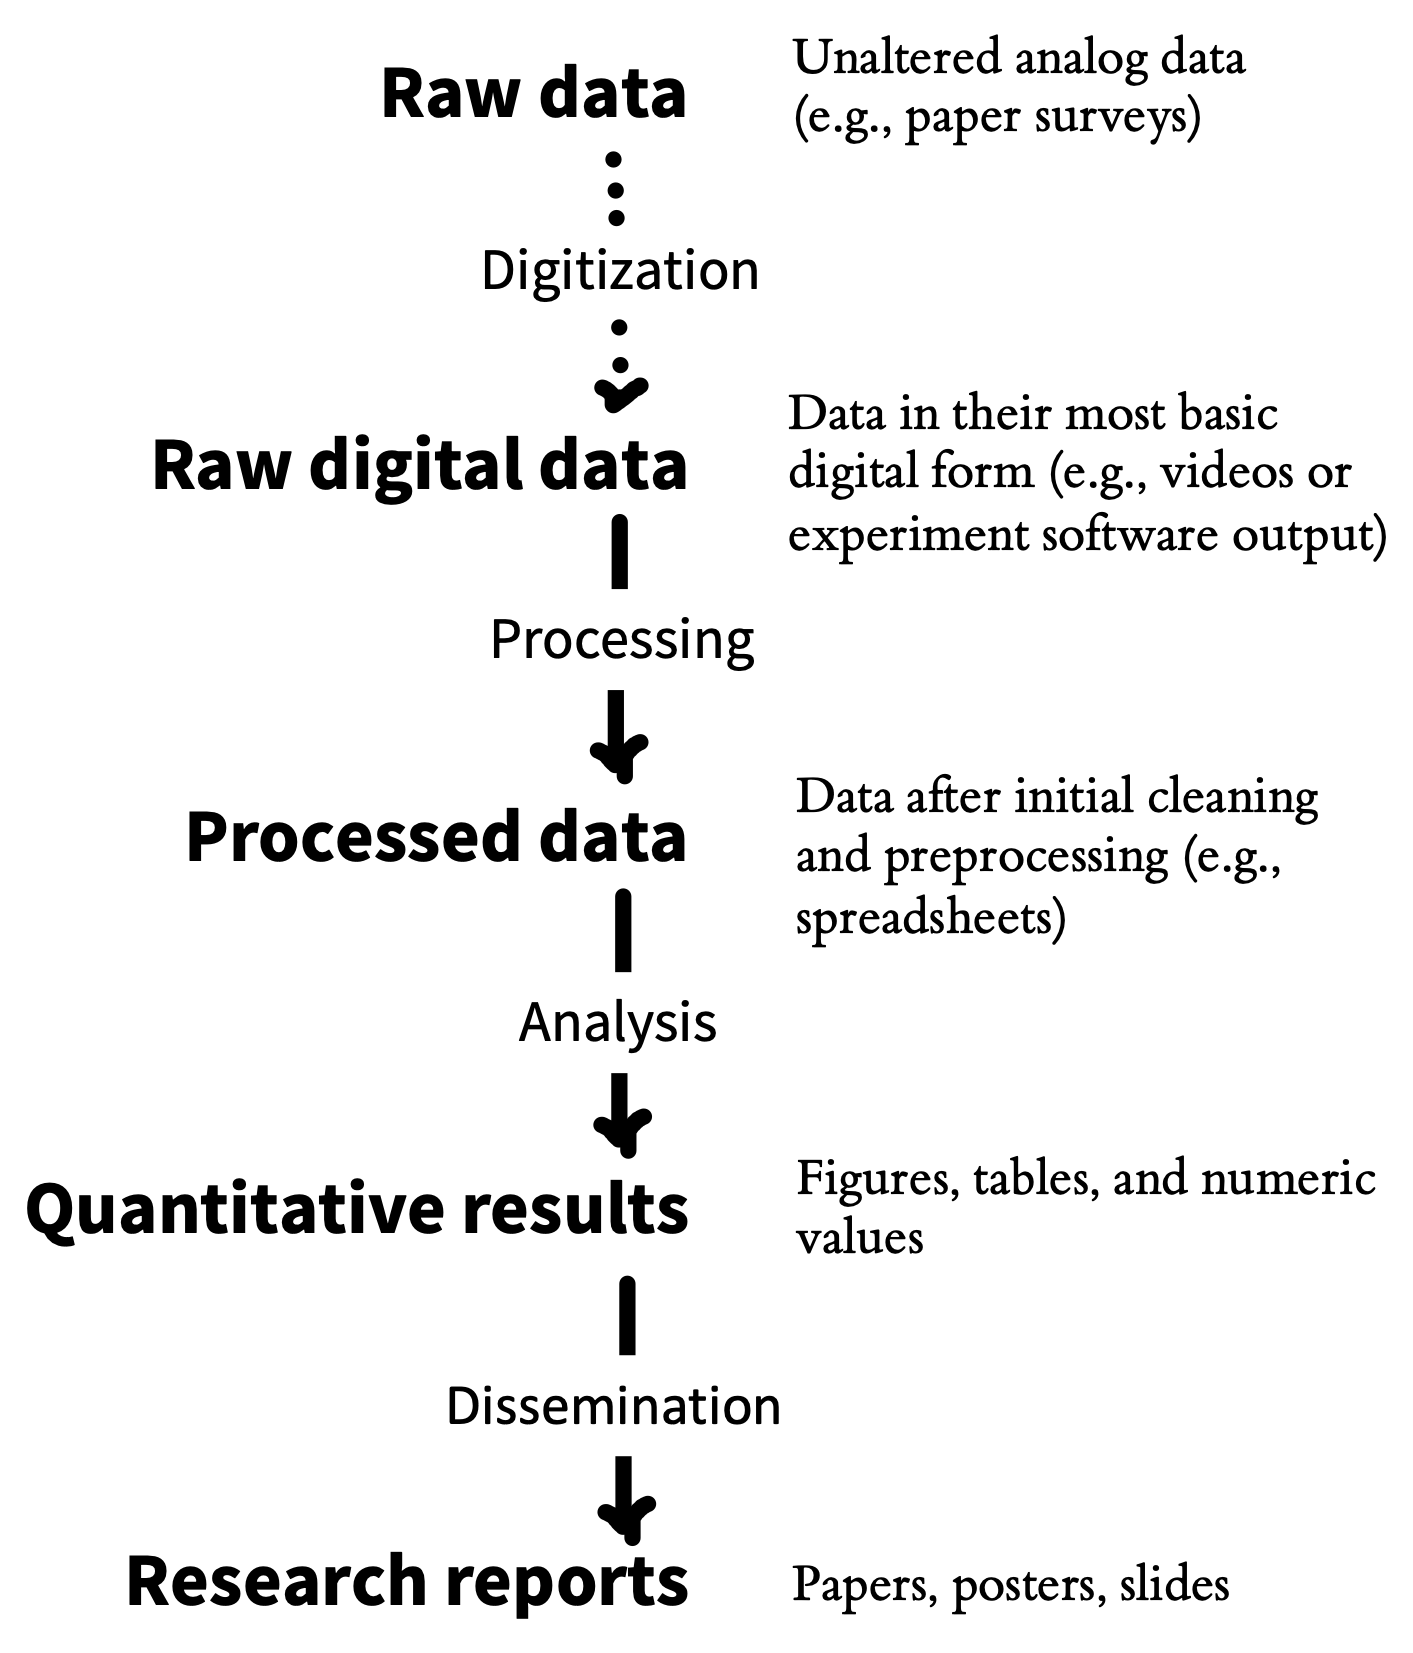 Illustration of the analytic chain from raw data through to research report.